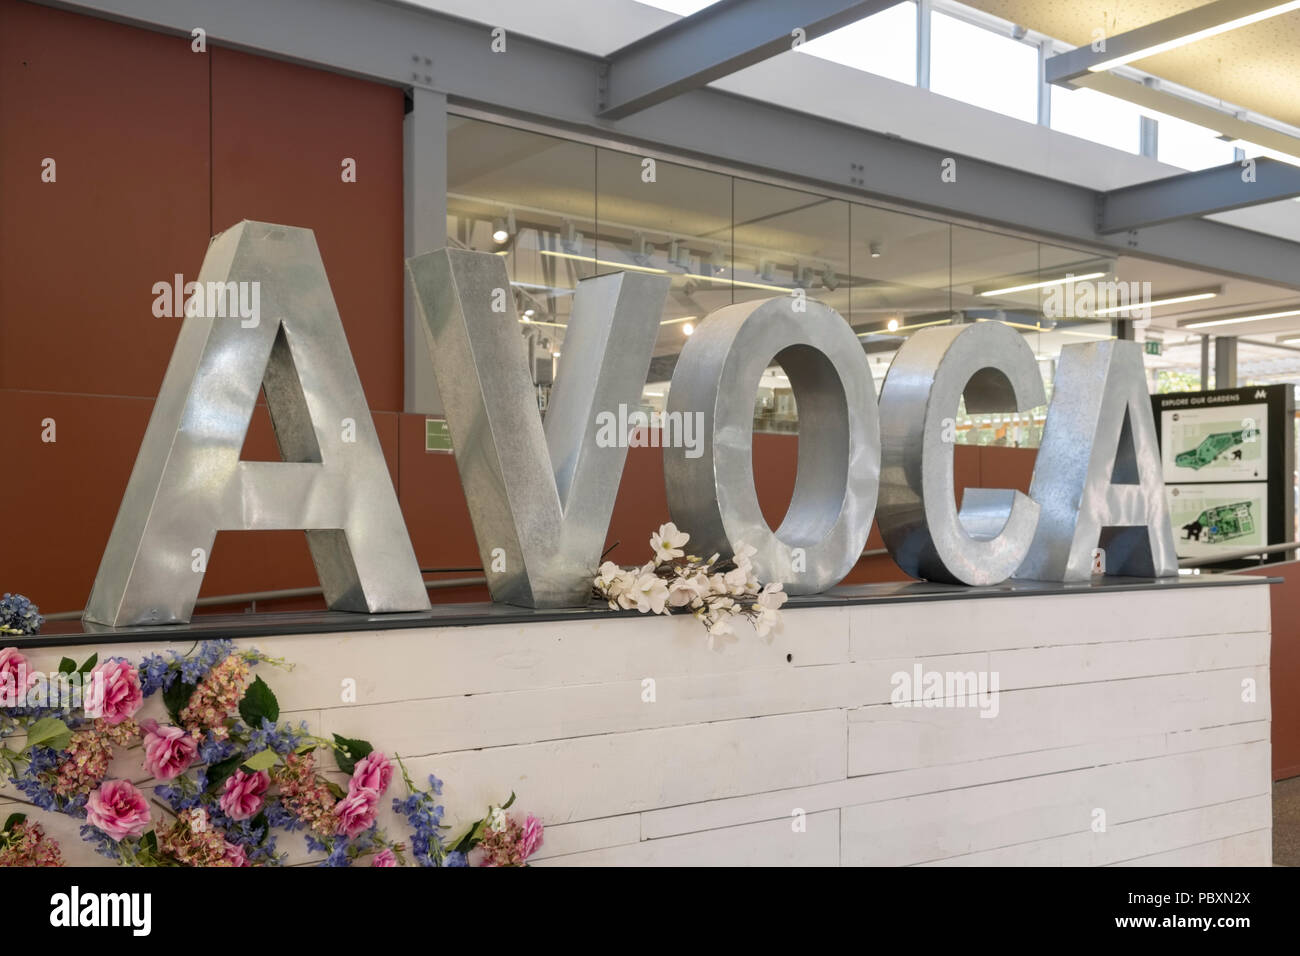 The logo sign of Avoca, an upmarket retail store in the Republic of Ireland, Europe Stock Photo